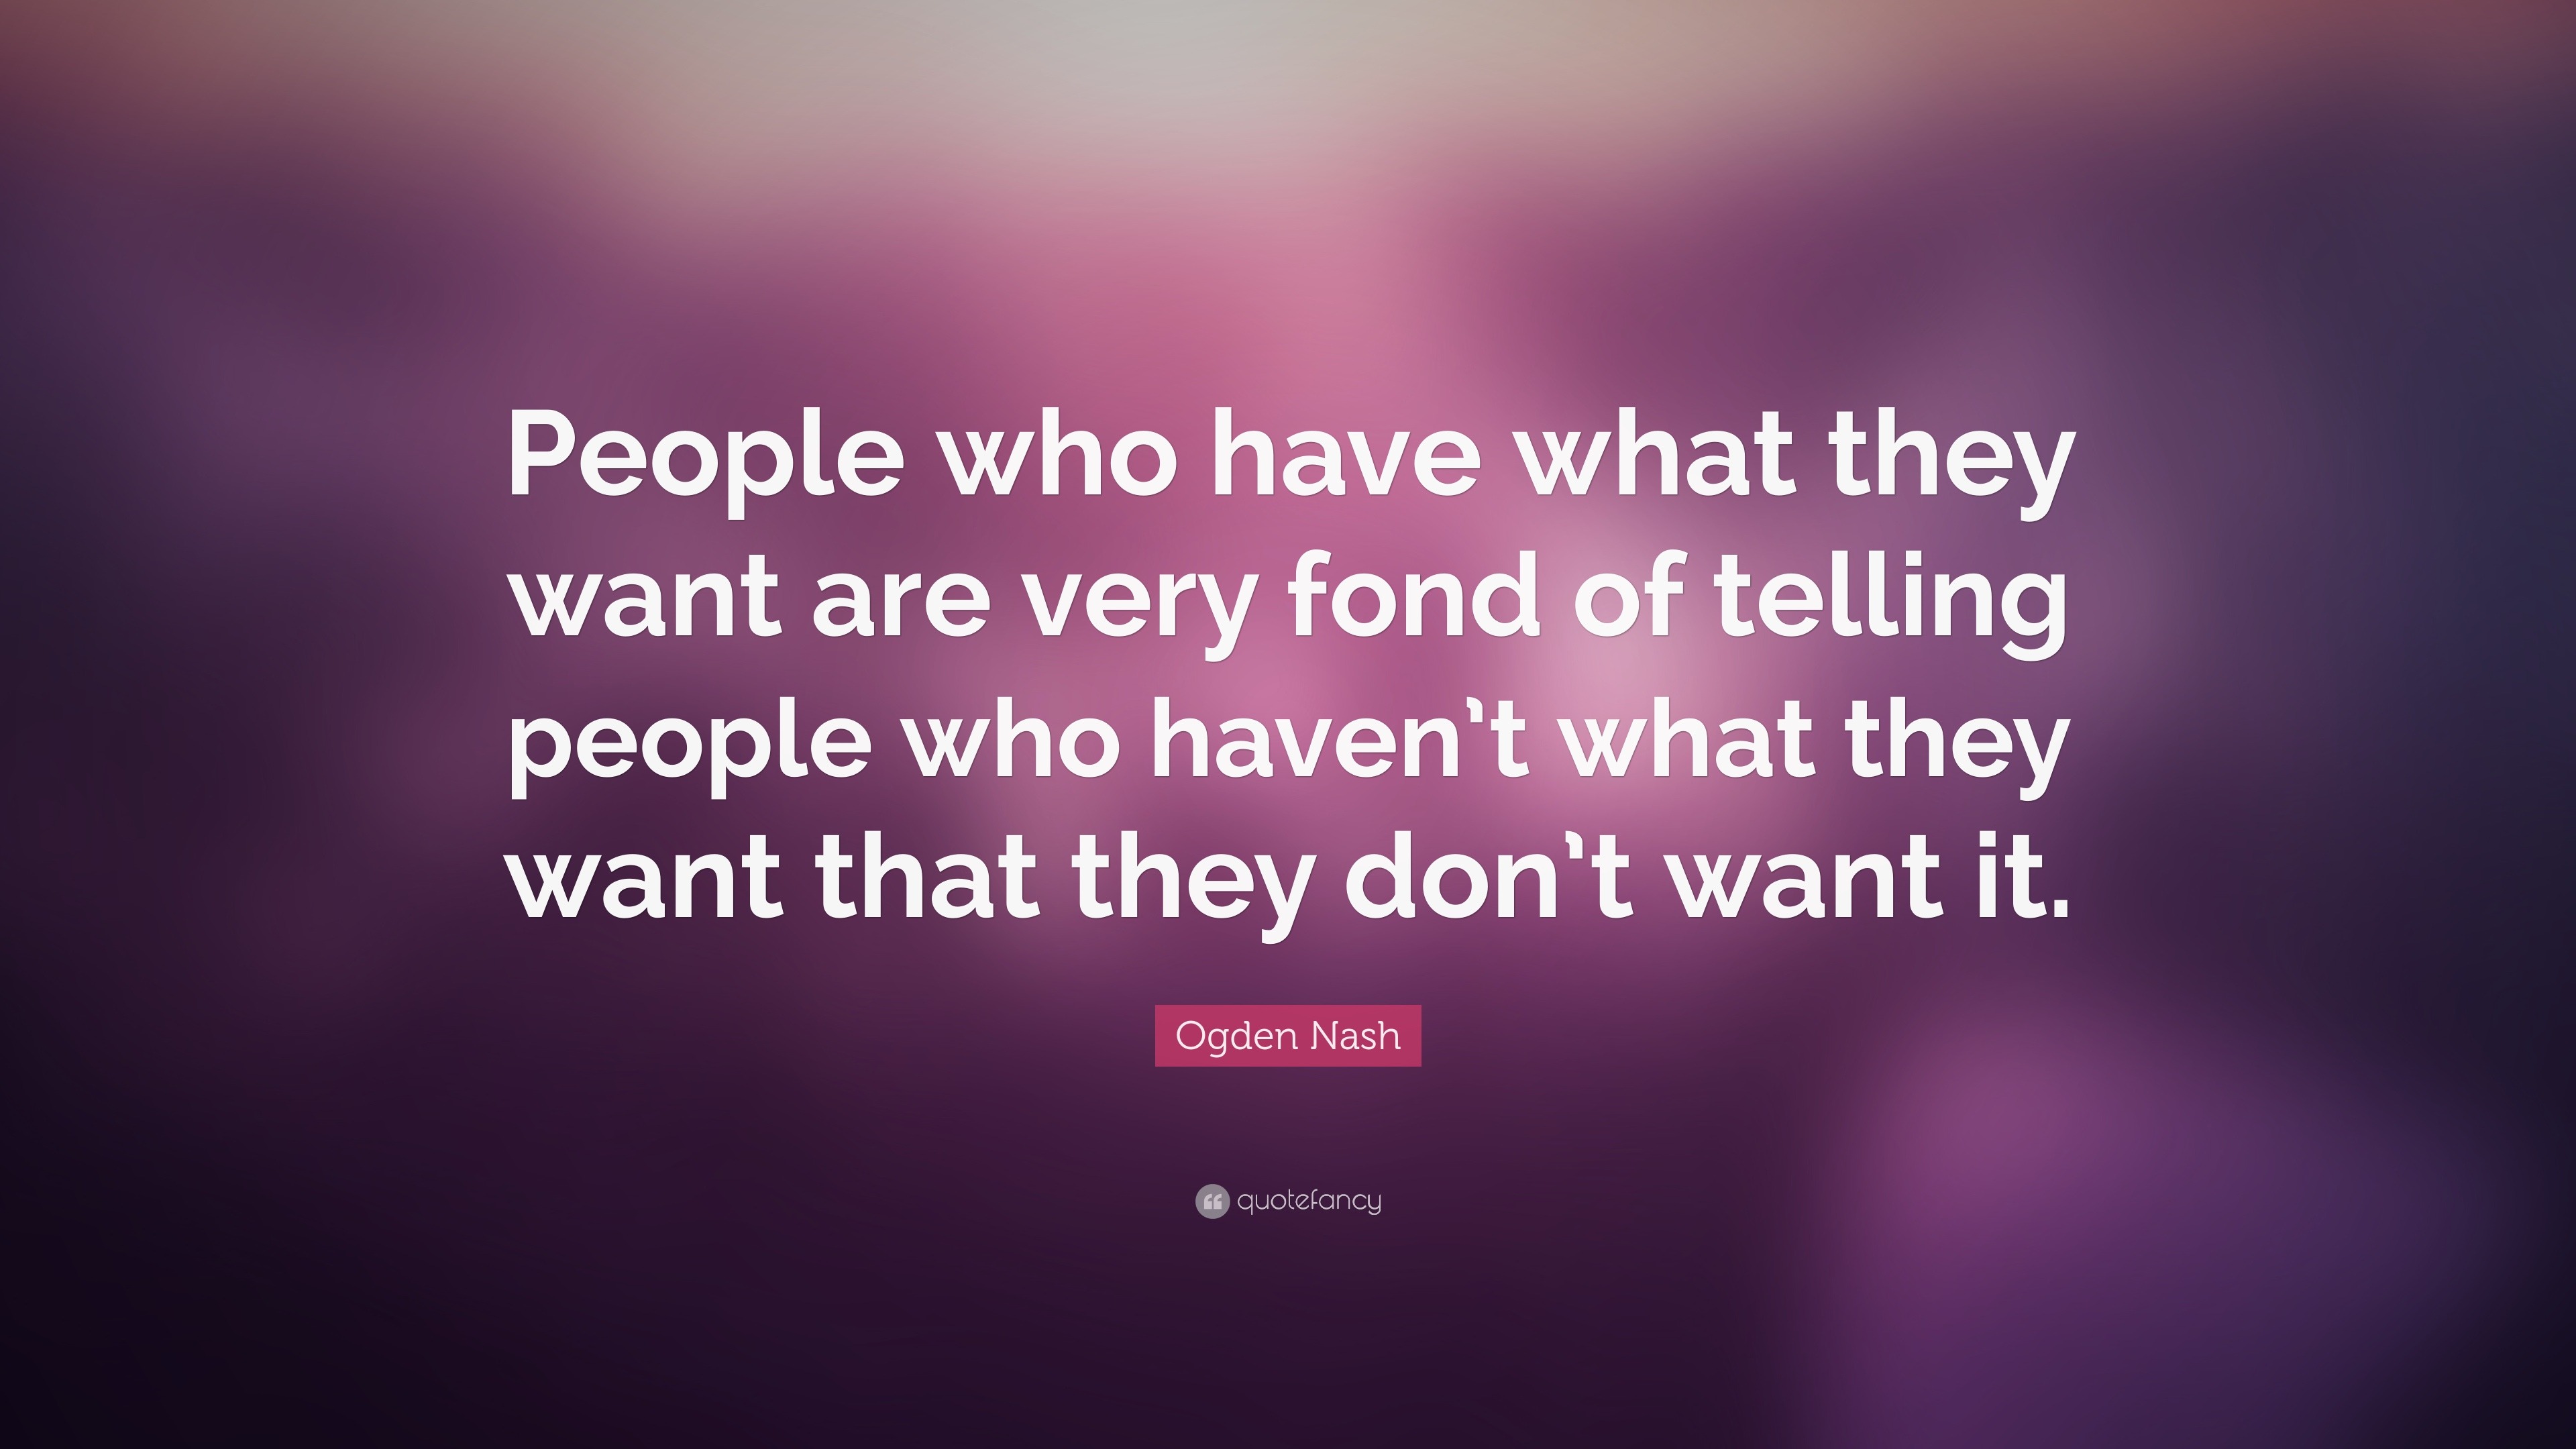 Ogden Nash Quote: “People who have what they want are very fond of ...